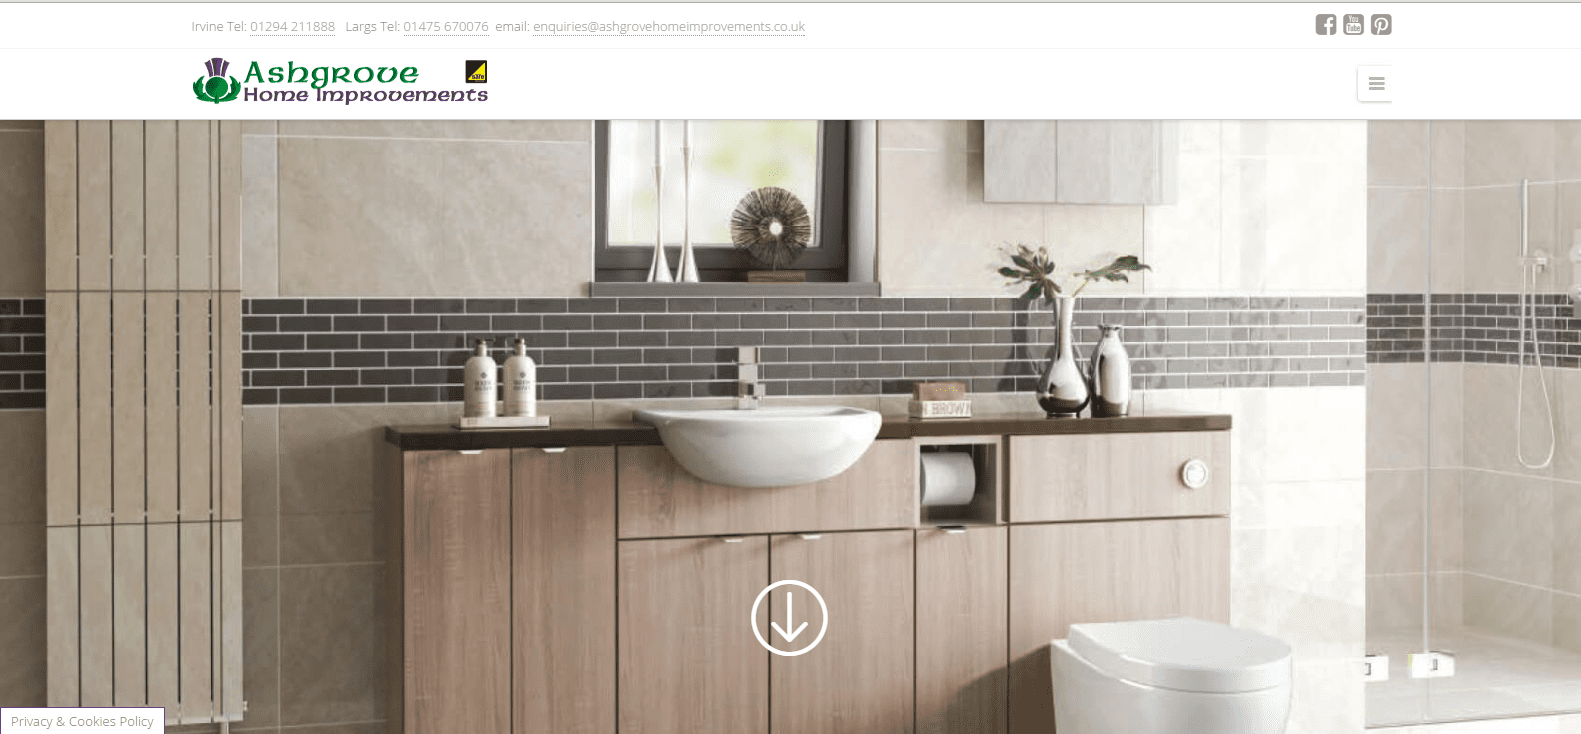 WordPress Website for Ashgrove Home Improvements by Corrie D Marketing